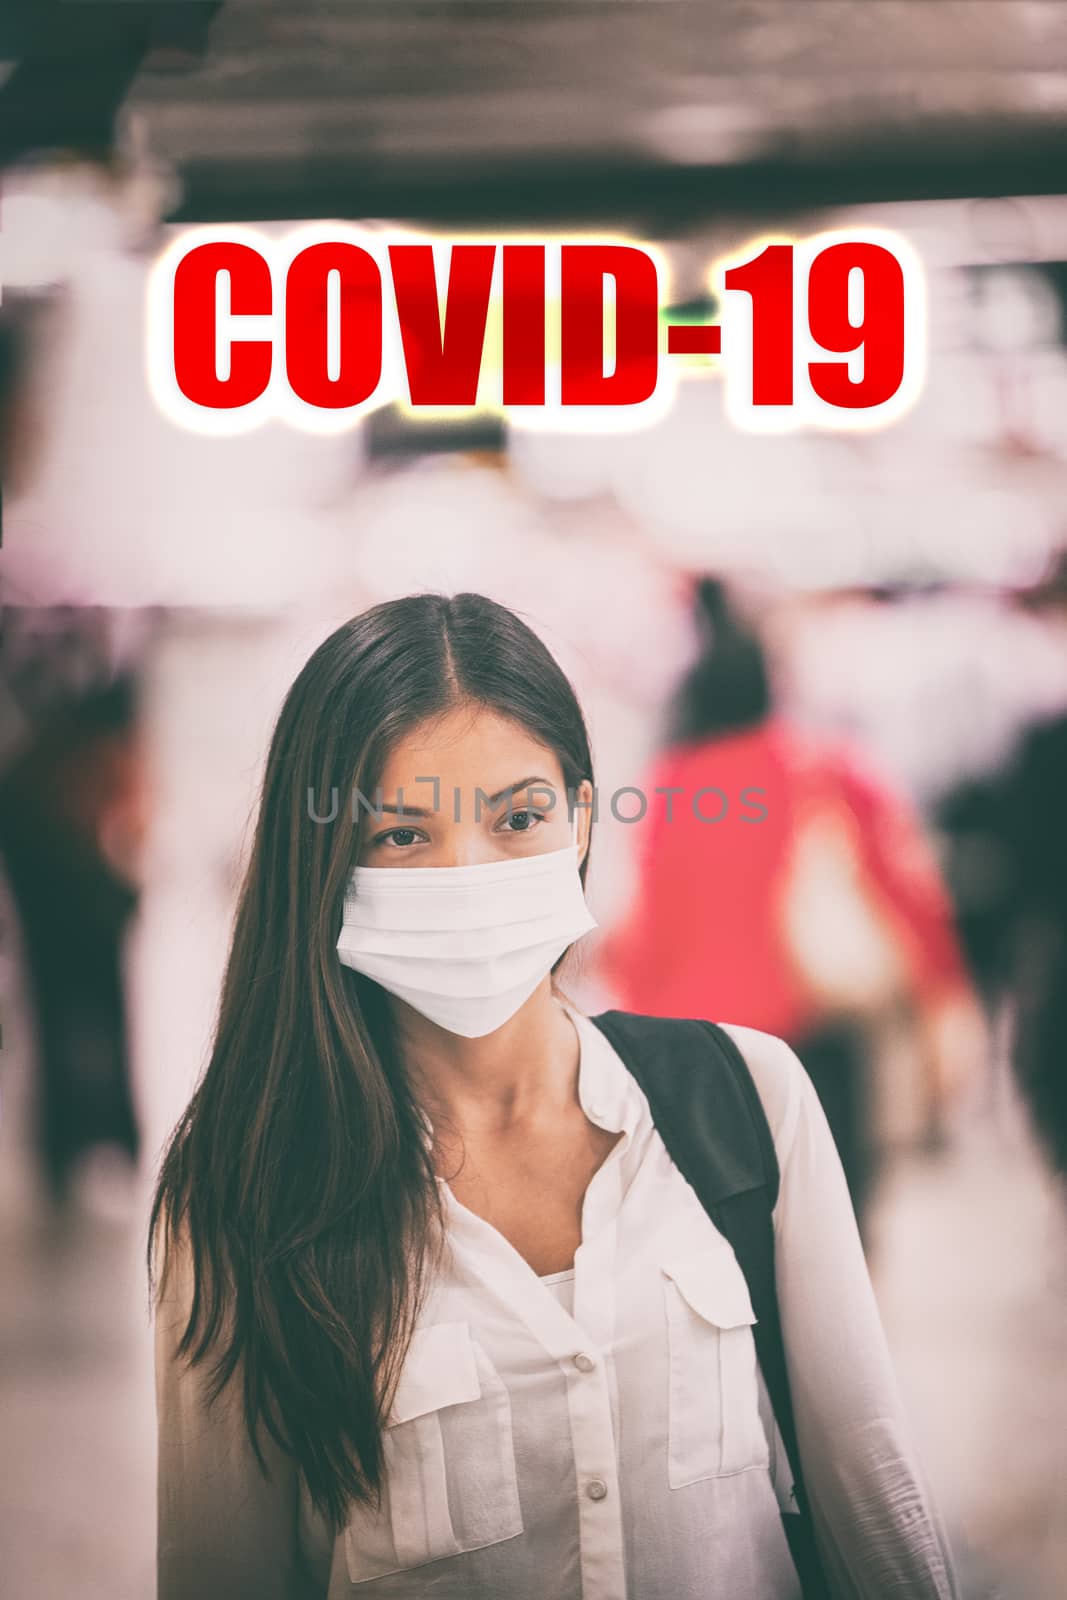 Coronavirus COVID-19 virus infection. Asian woman walking in airport crowd wearing virus surgical face mask with text title above. Vertical by Maridav